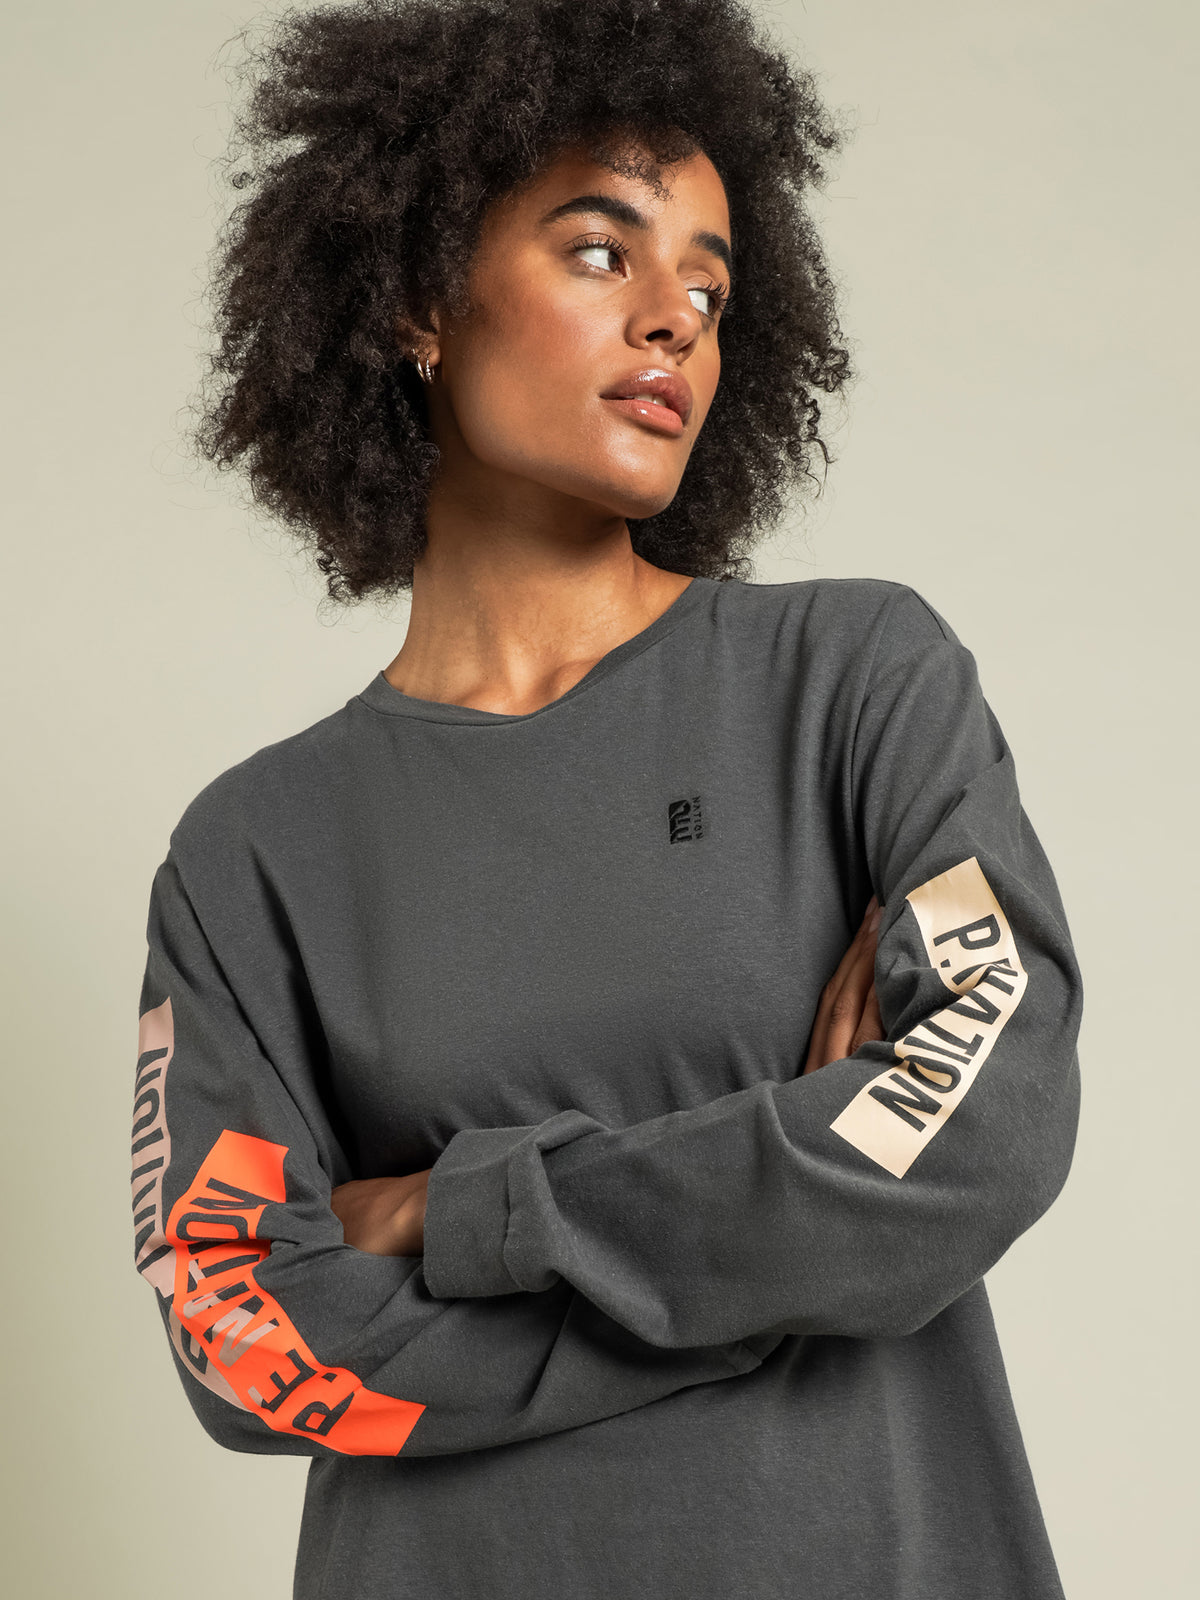 Salto Long Sleeve Top in Charcoal